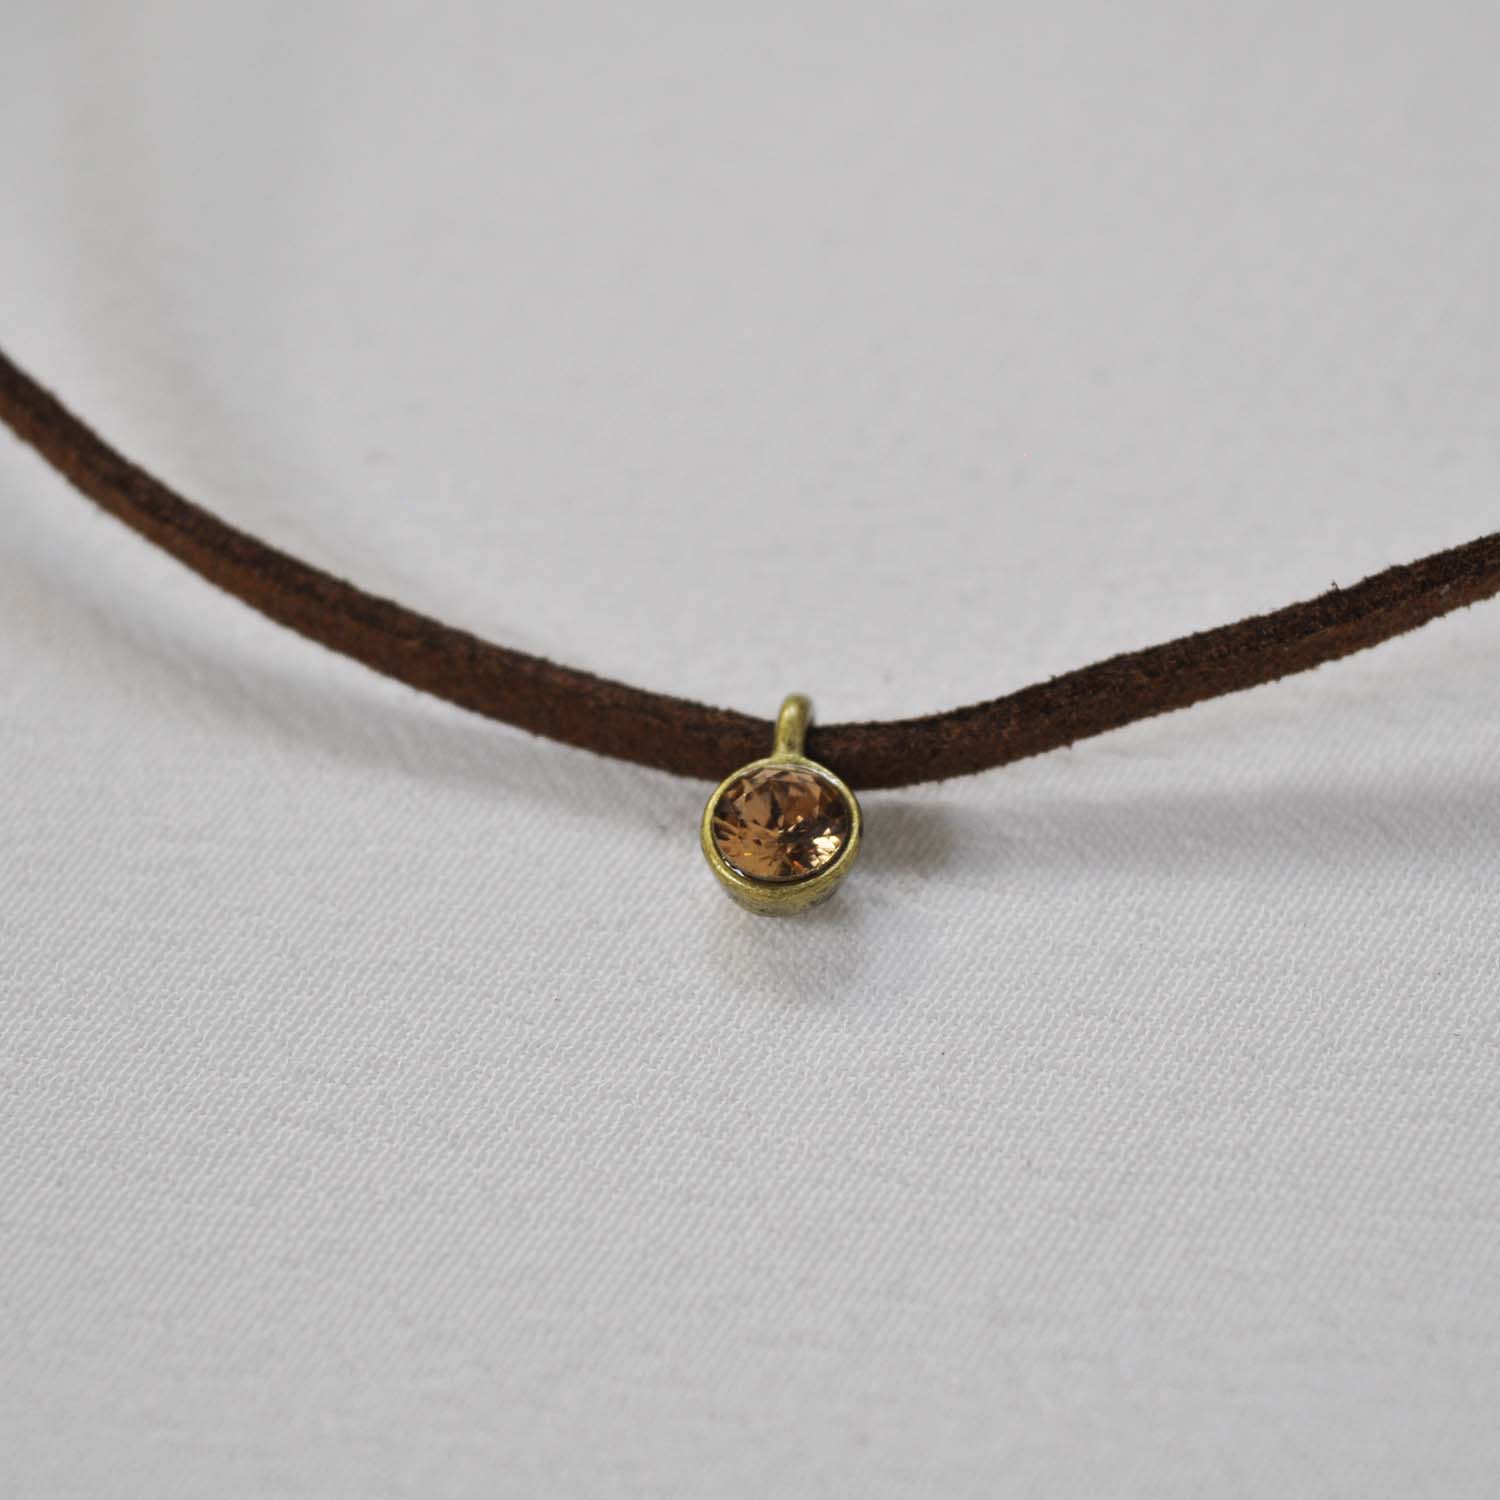 Brown necklace